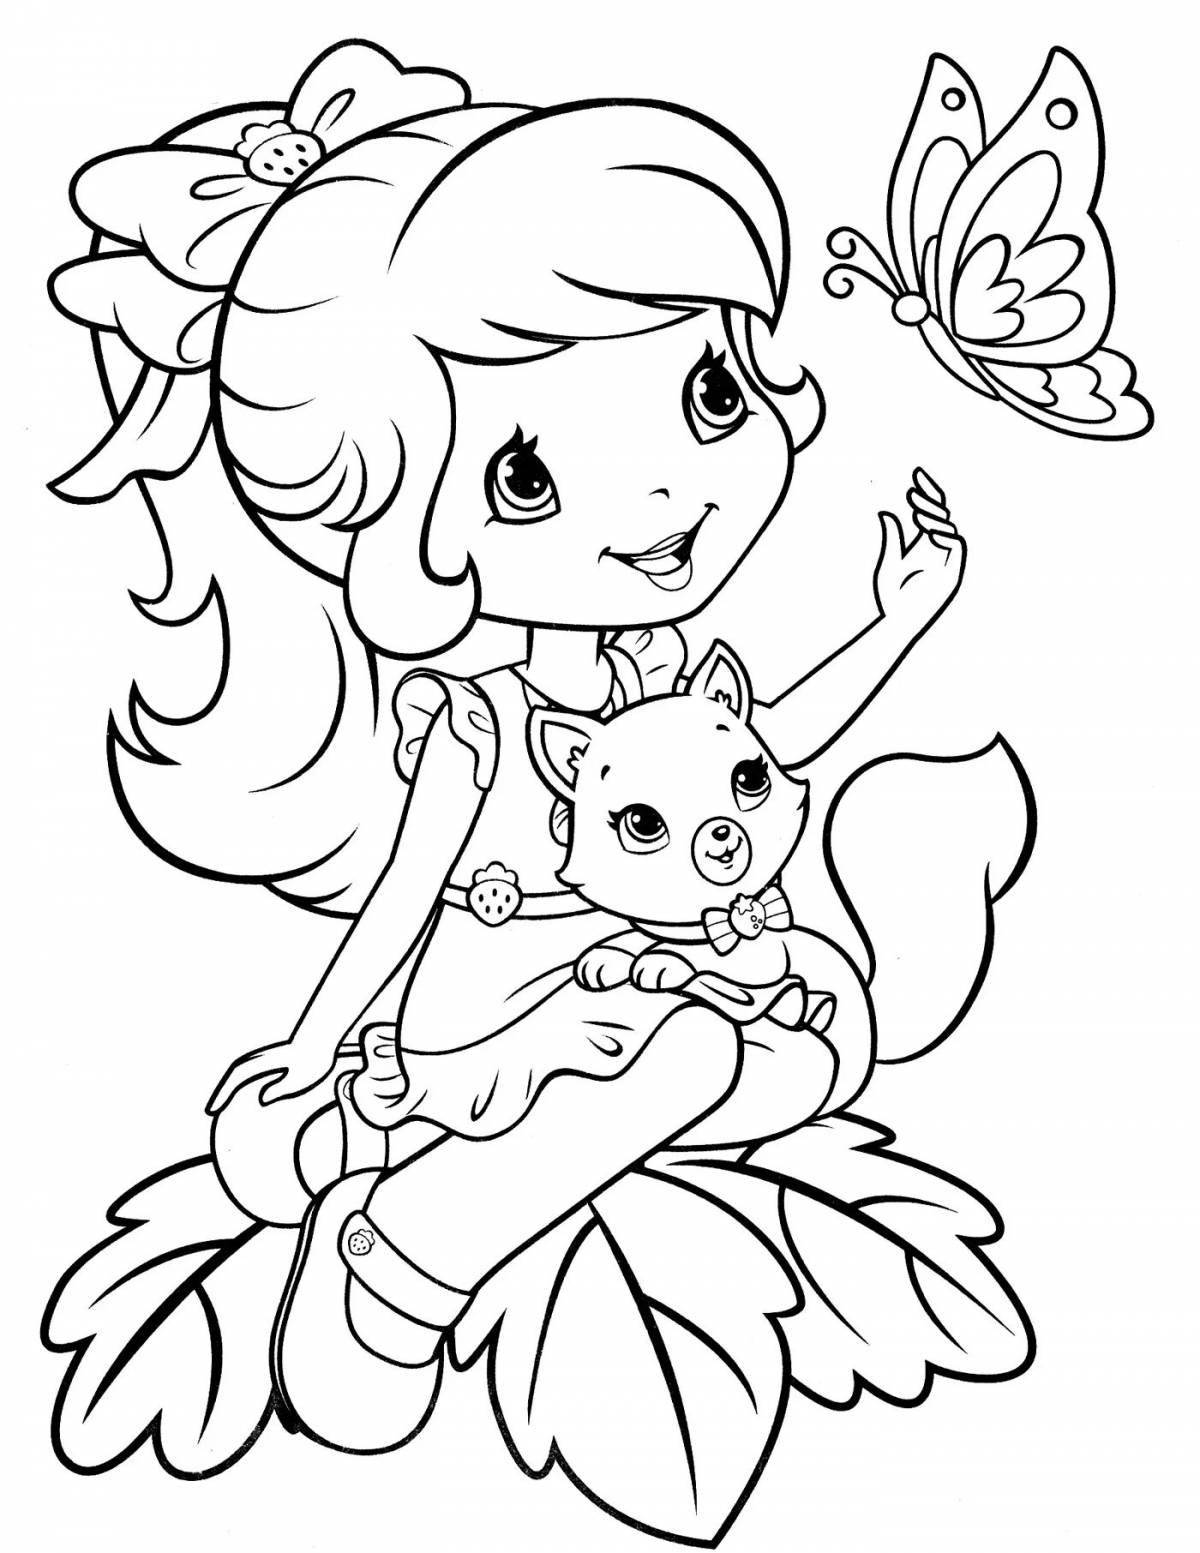 Coloring page fat loading